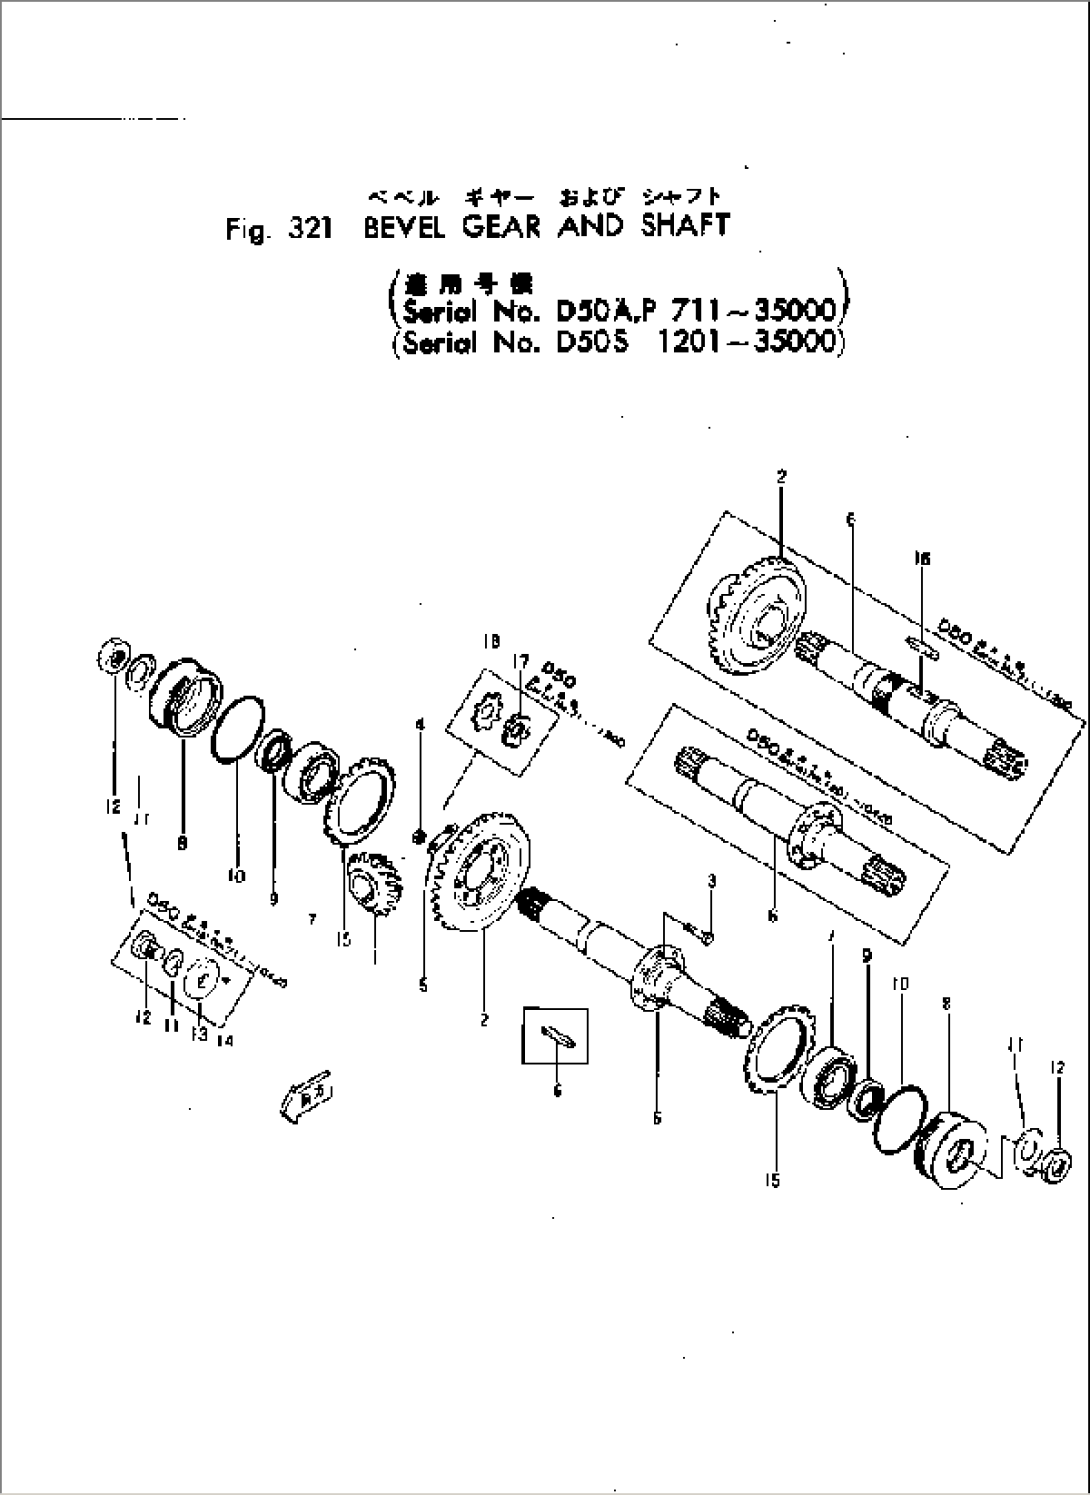 BEVEL GEAR AND SHAFT(#1201-)